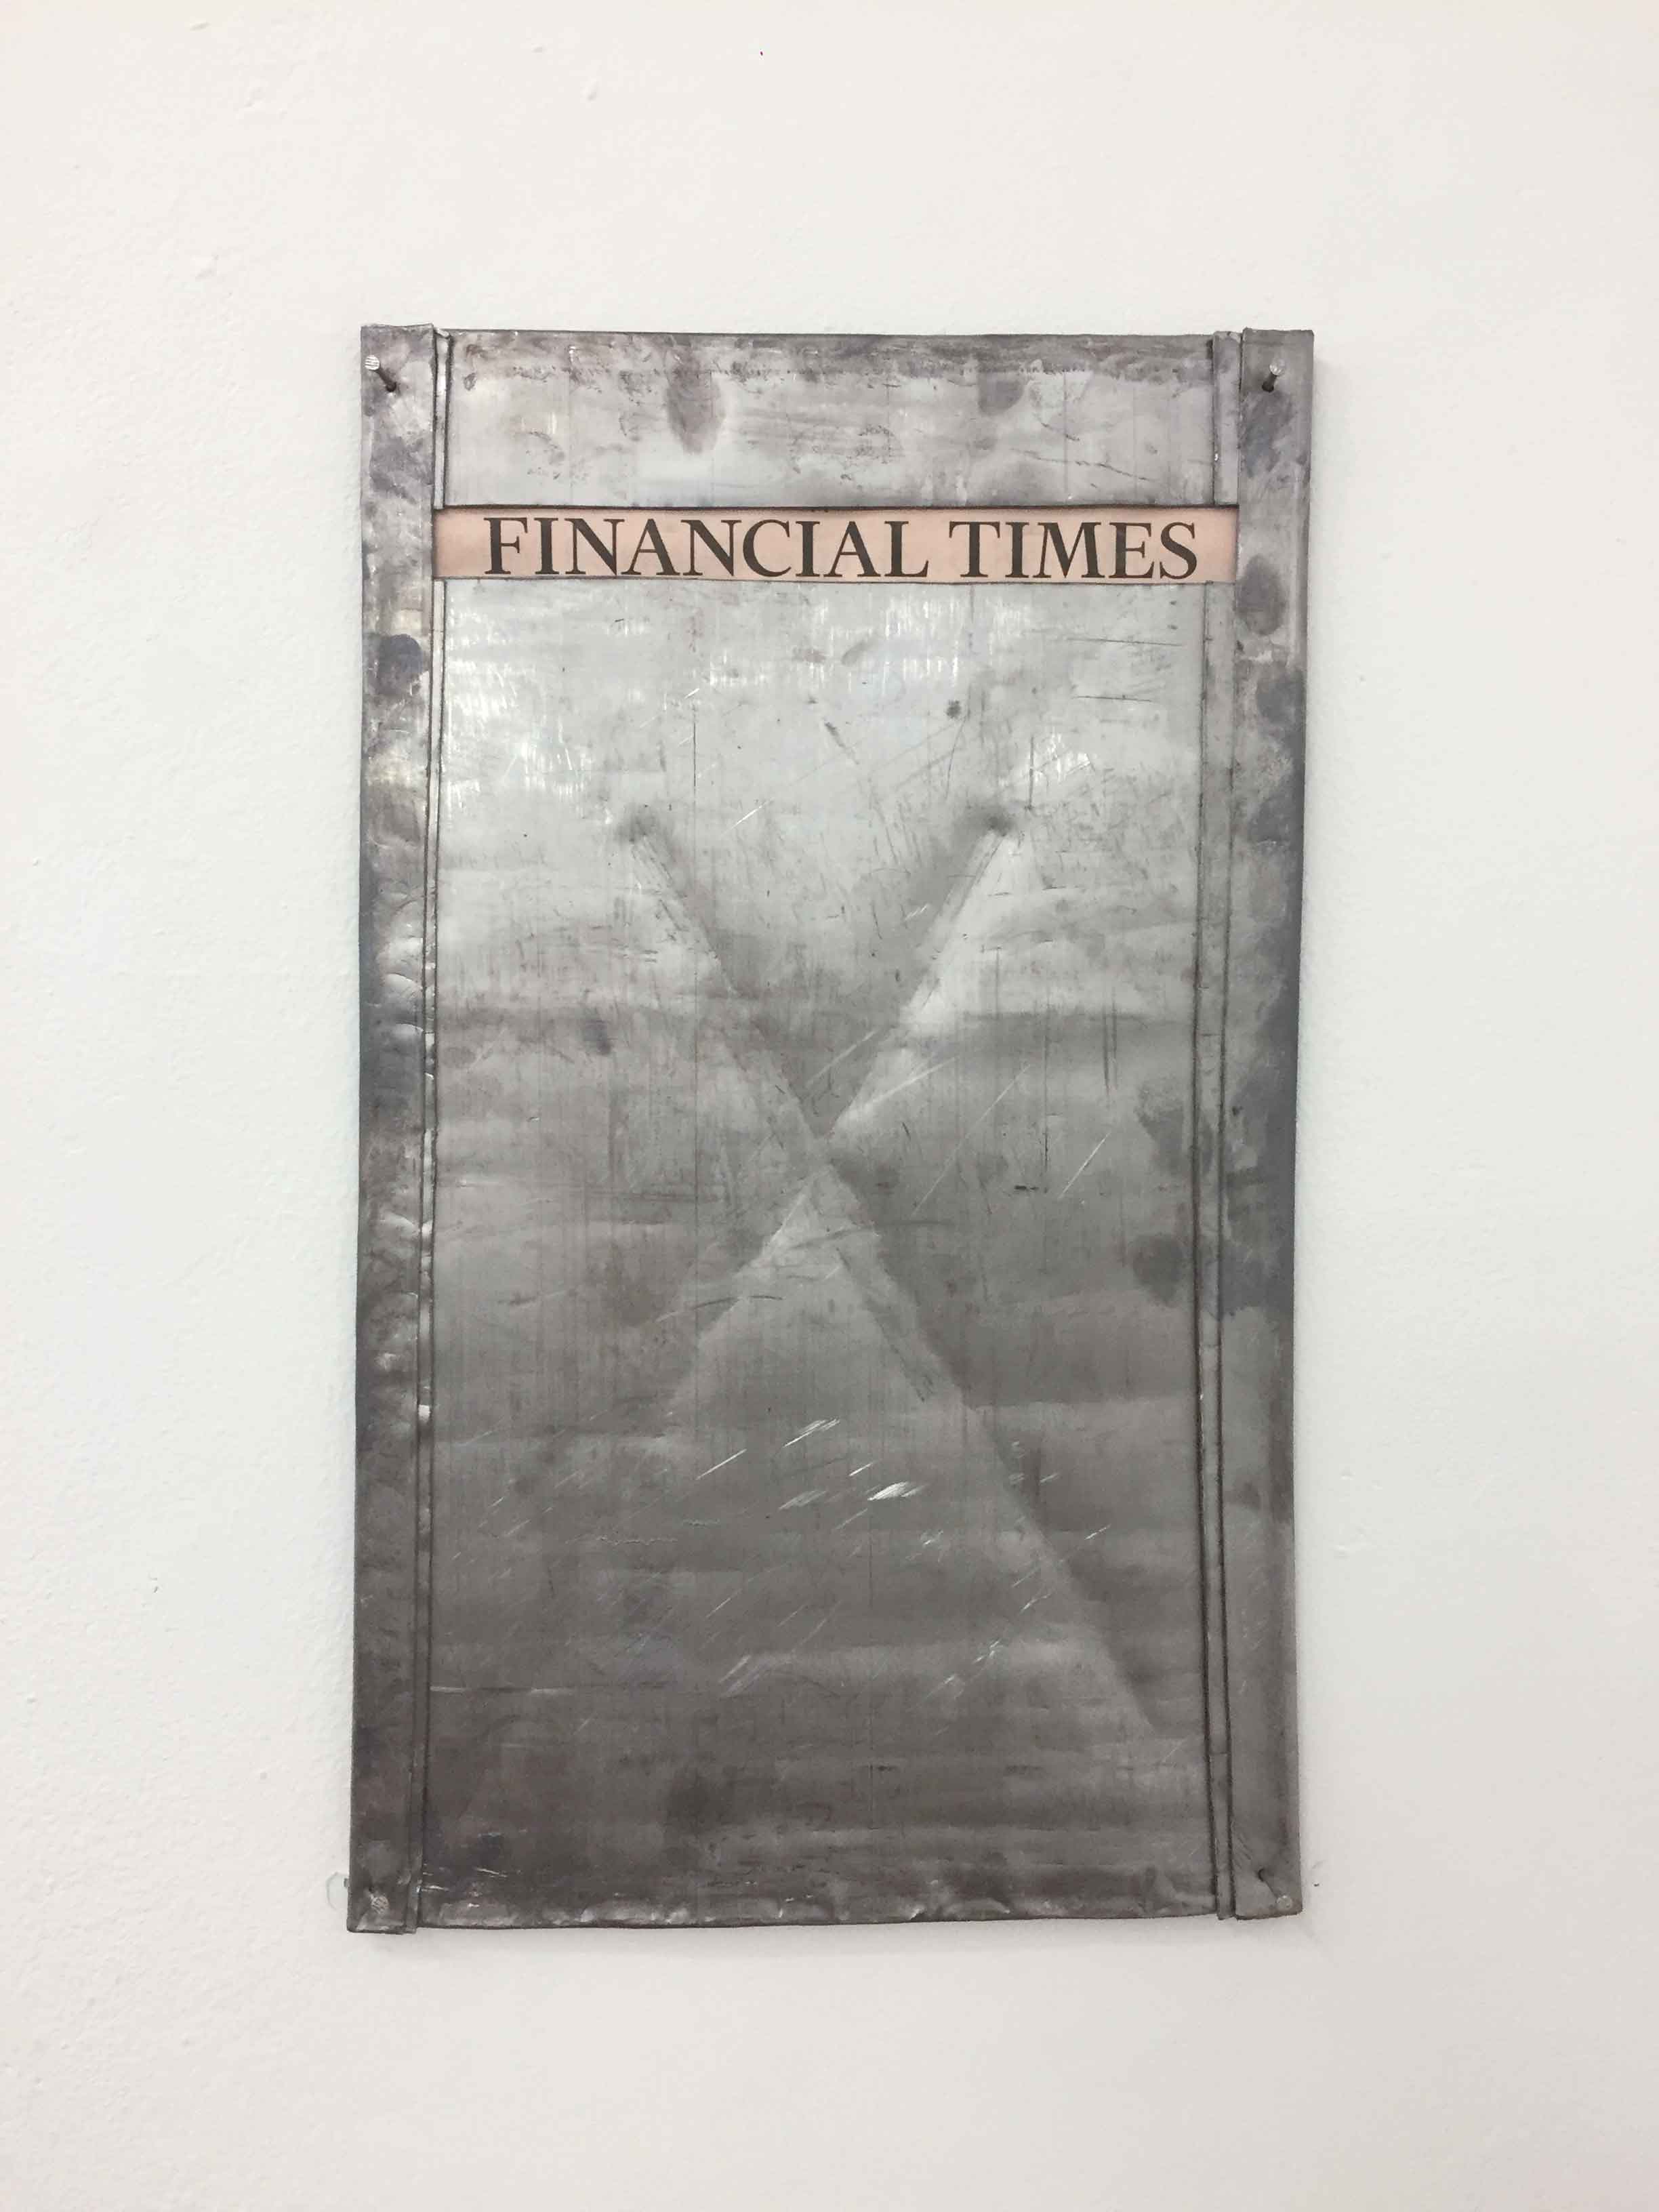 Financial Times of the series Contrato Social